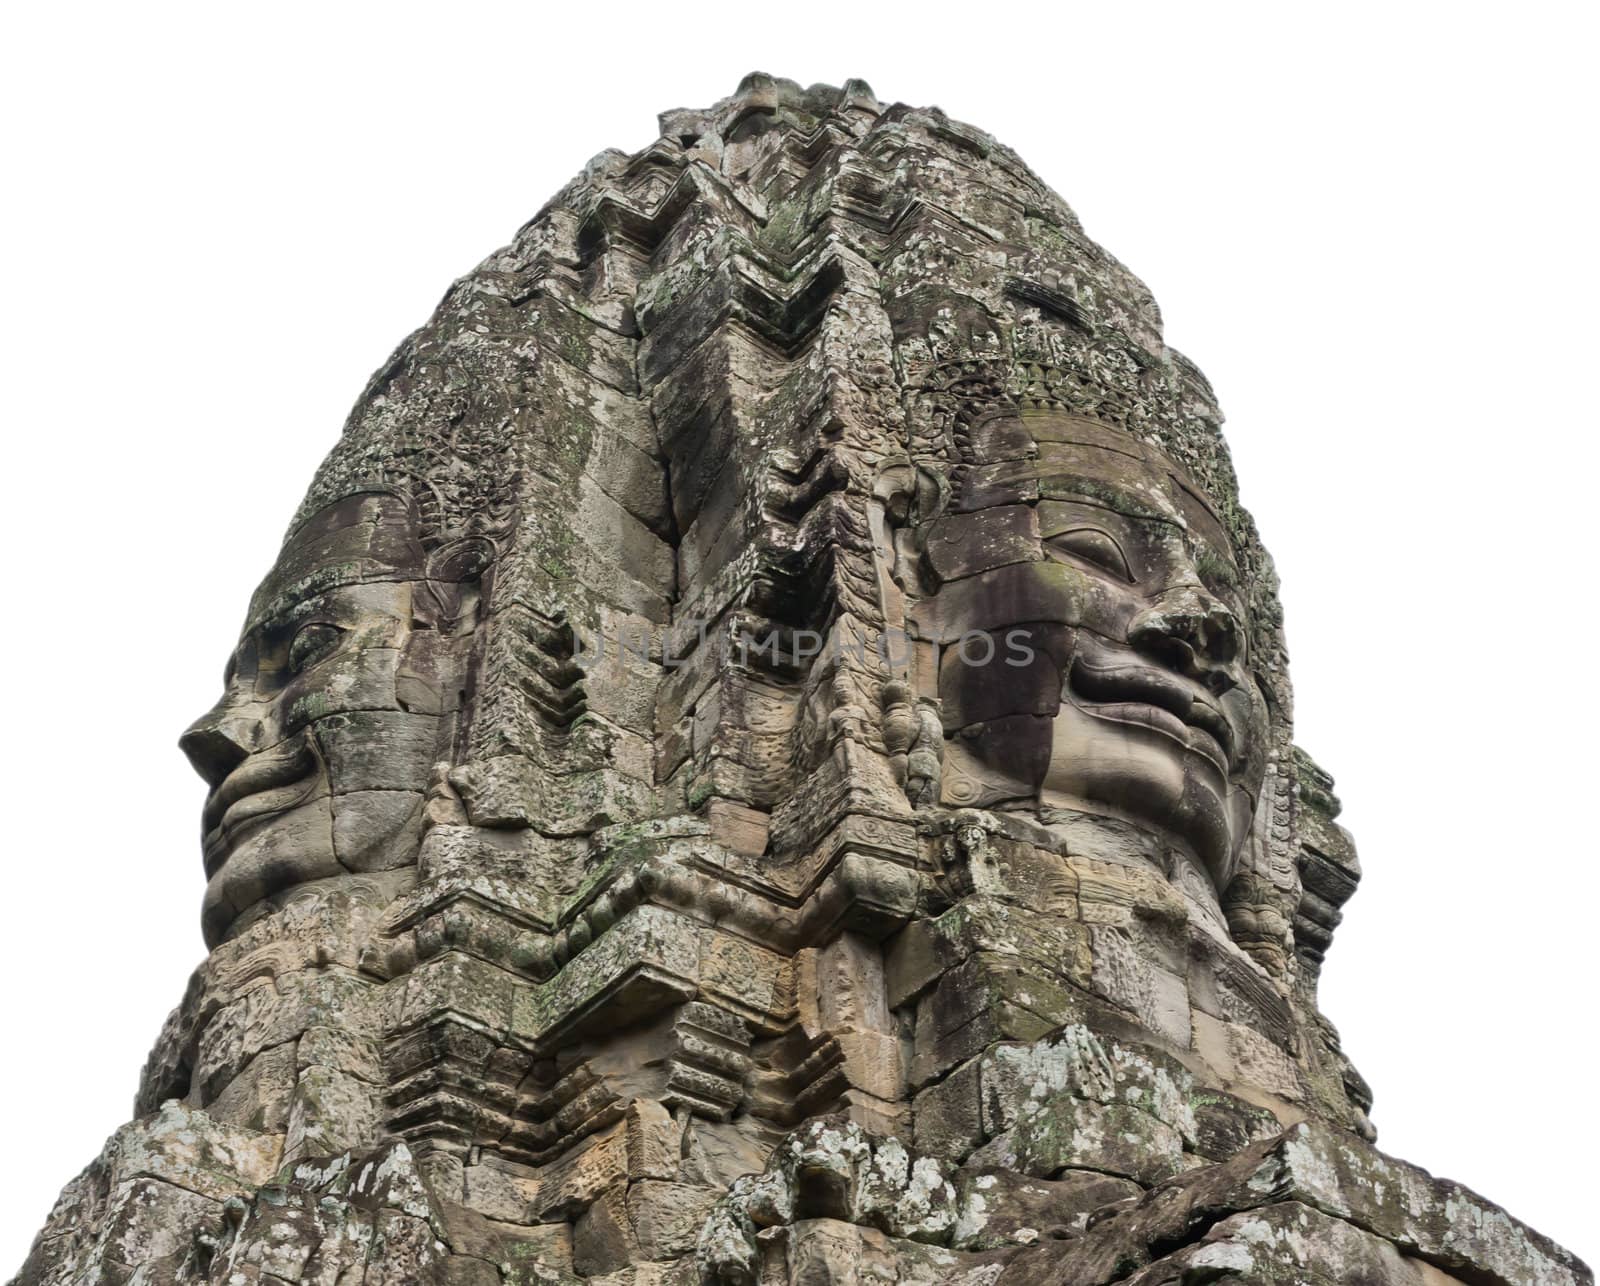 Stone faces, Bayon Temple - Angkor Area, isolated on white background